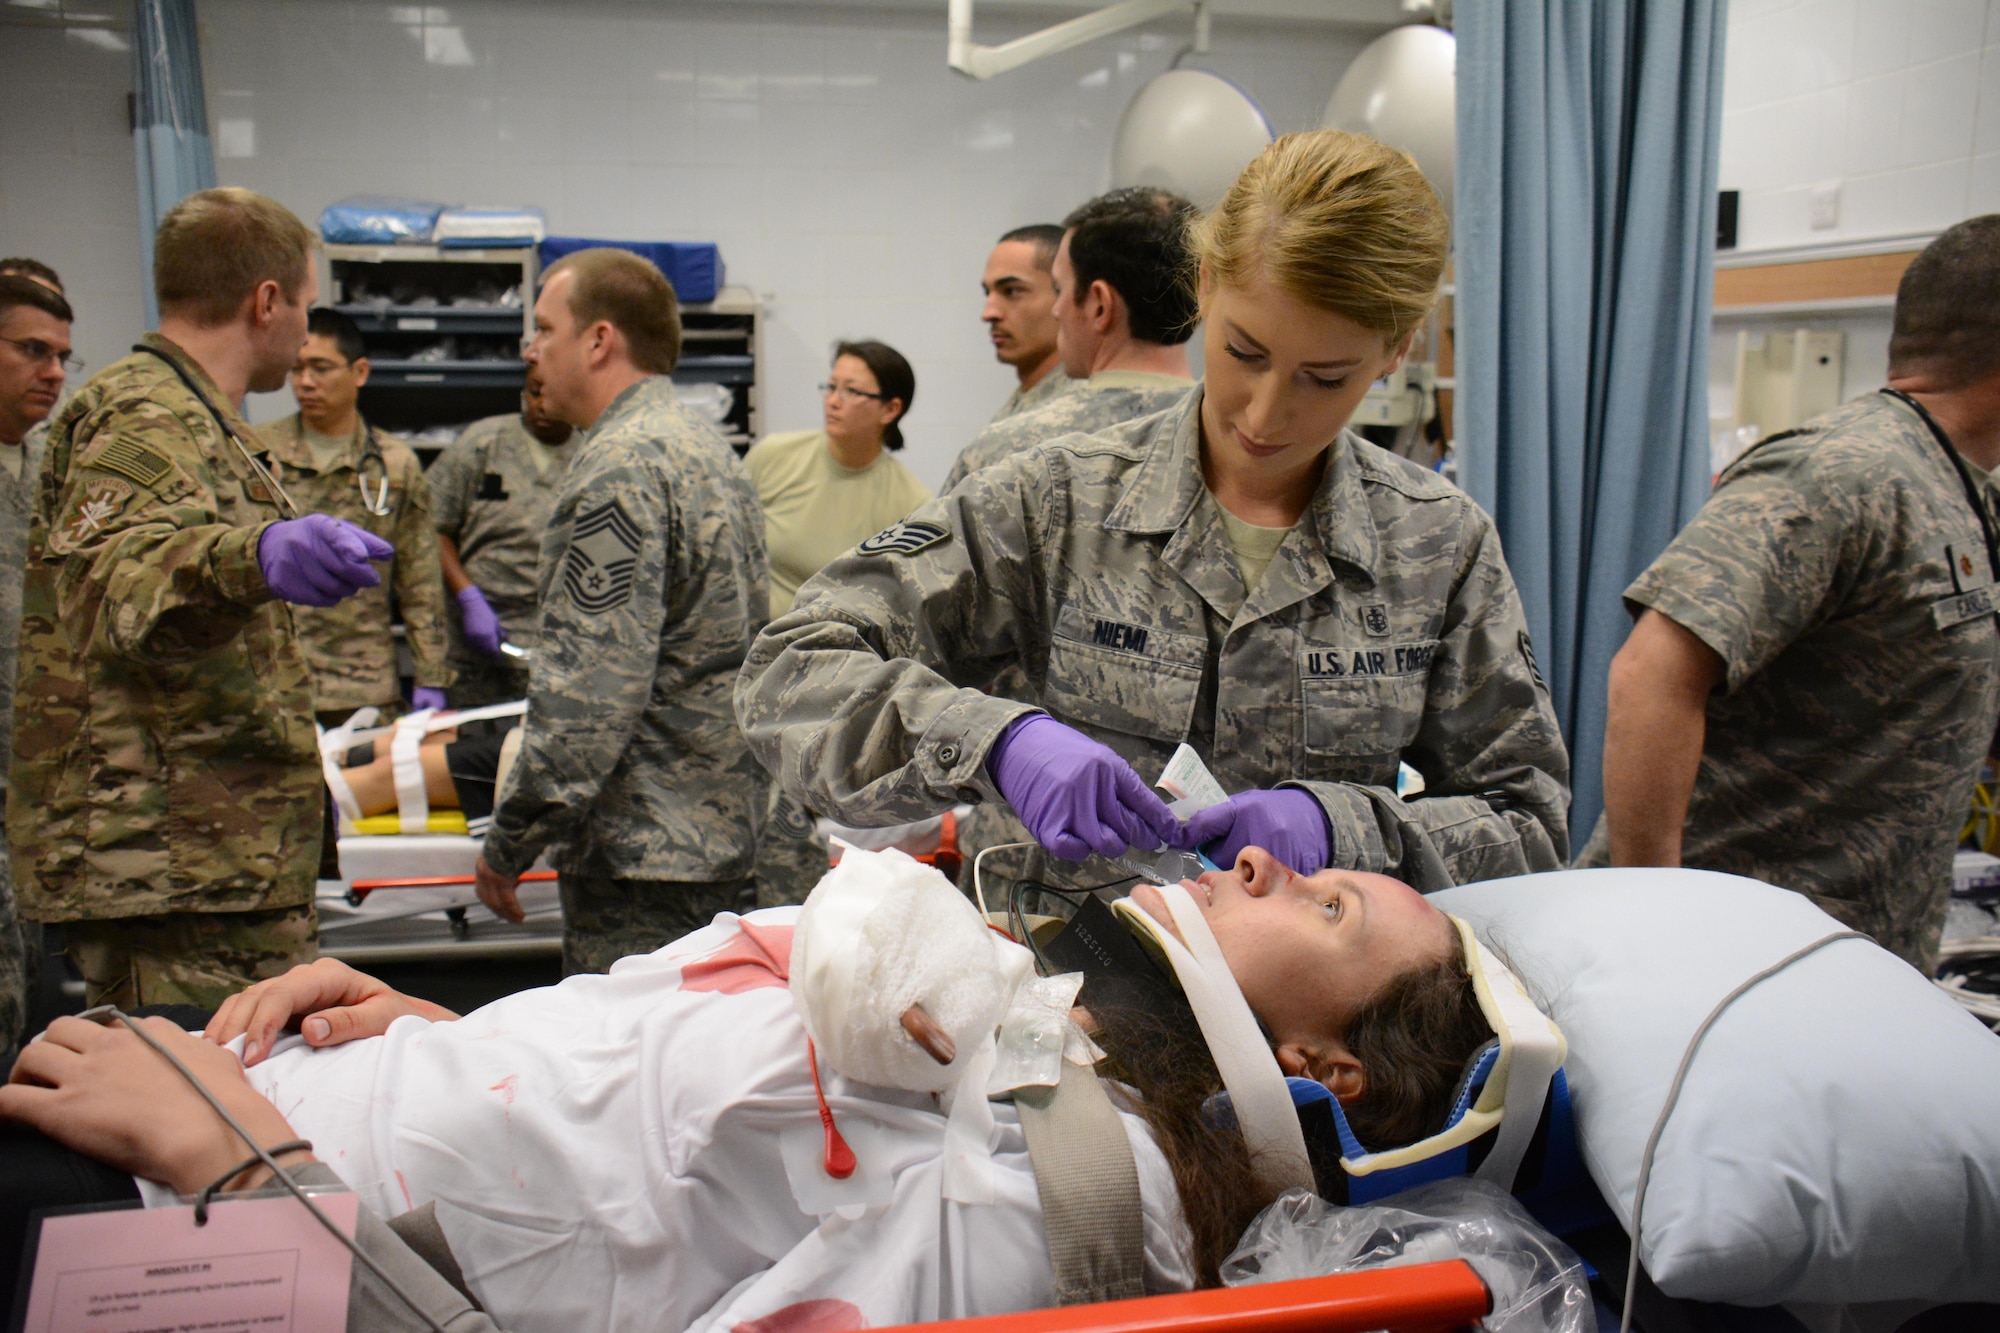 Staff Sgt. Brittany Niemi, 379th Expeditionary Medical Operations Squadron, provides care for a victim of a mock car accident in the Blatchford-Preston Complex Clinic during an exercise at Al Udeid Air Base, Qatar Dec. 15. All patients were transported to the clinic where they received emergency medical treatment. More than 50 first responders participated in the exercise. (U.S. Air Force photo by Tech. Sgt. James Hodgman/Released)